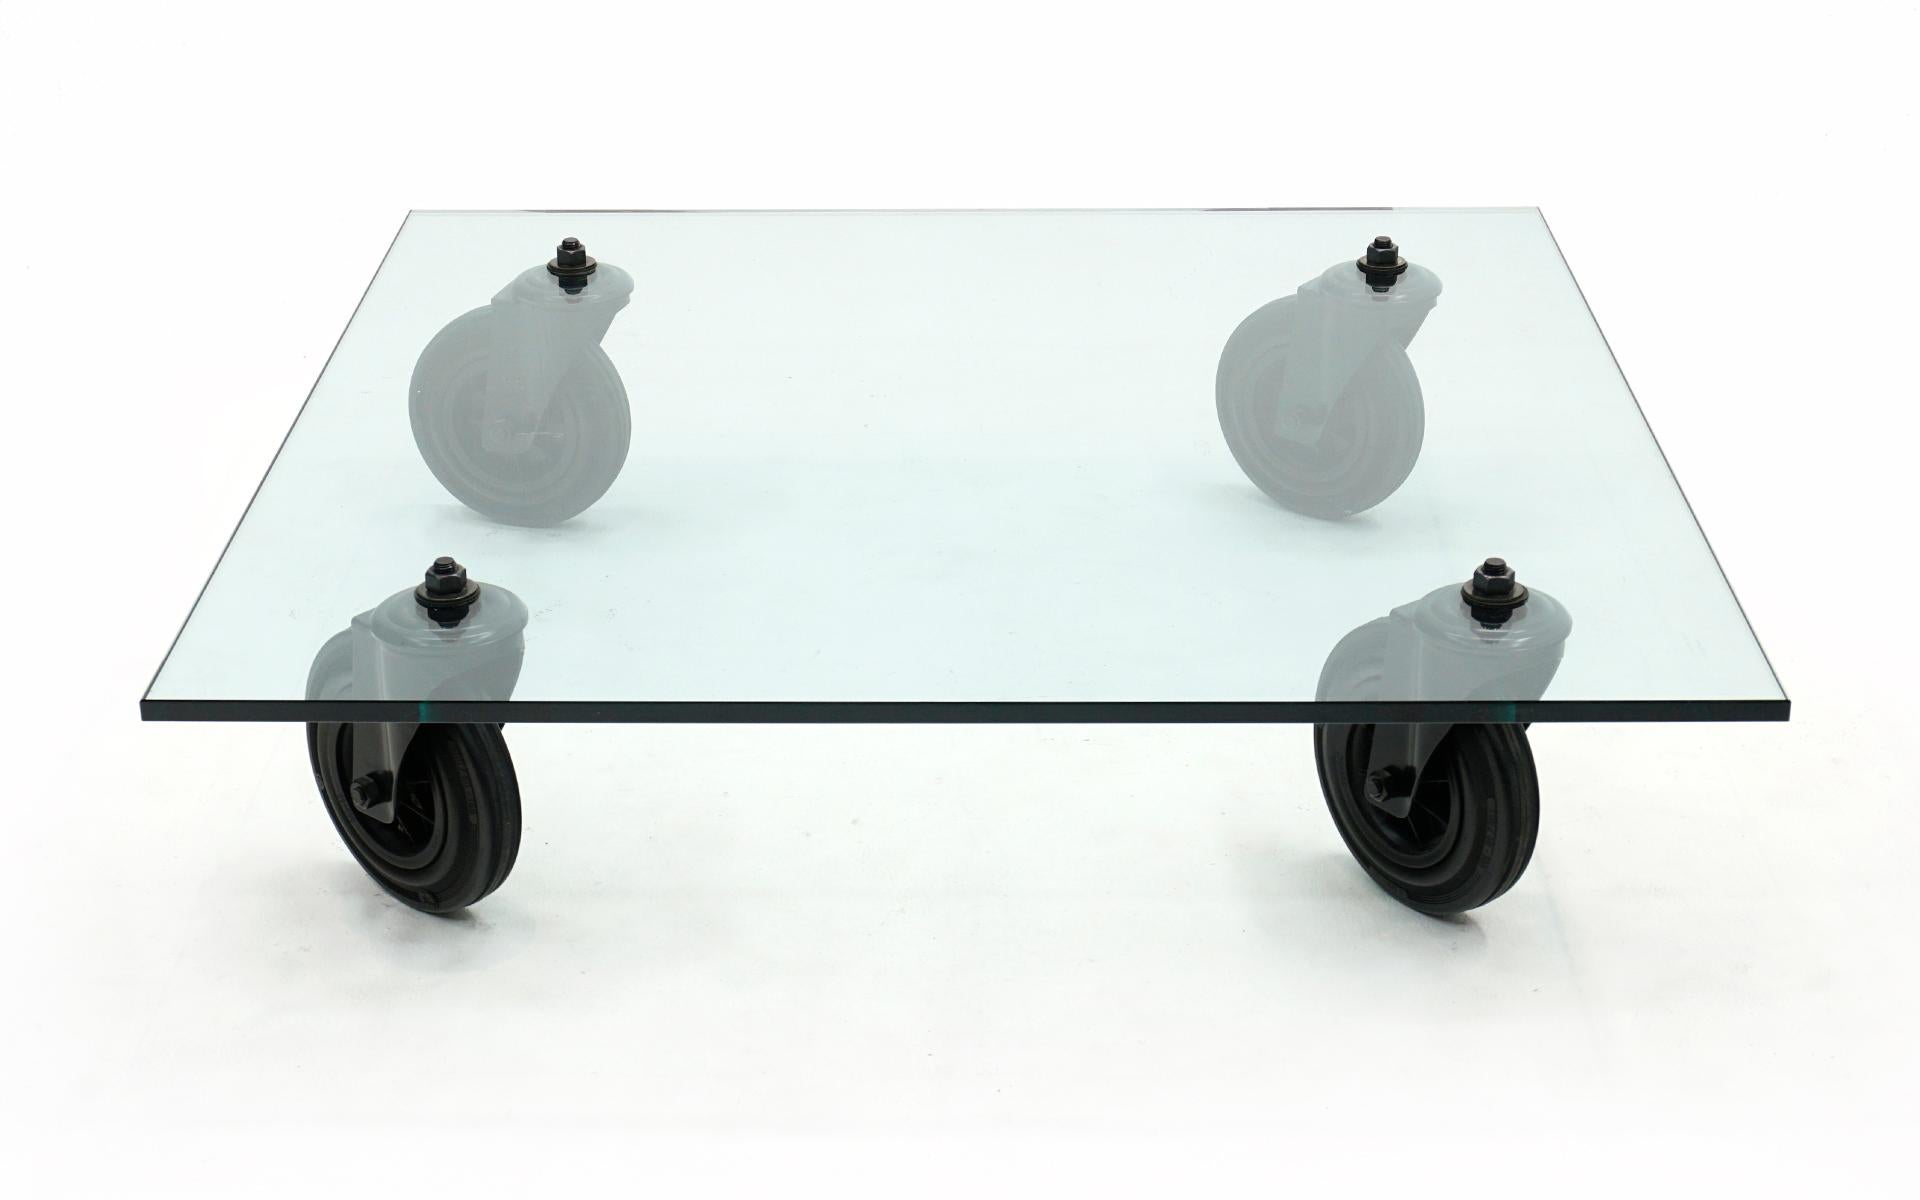 Tavolo Con Ruote coffee table designed by Gae Aulenti for Fontana Arte, Italy, 1980. The tempered glass is slightly over 1/2 inch thick and almost 40 inches square. Extremely high quality build. No chips or significant scratches to the glass.